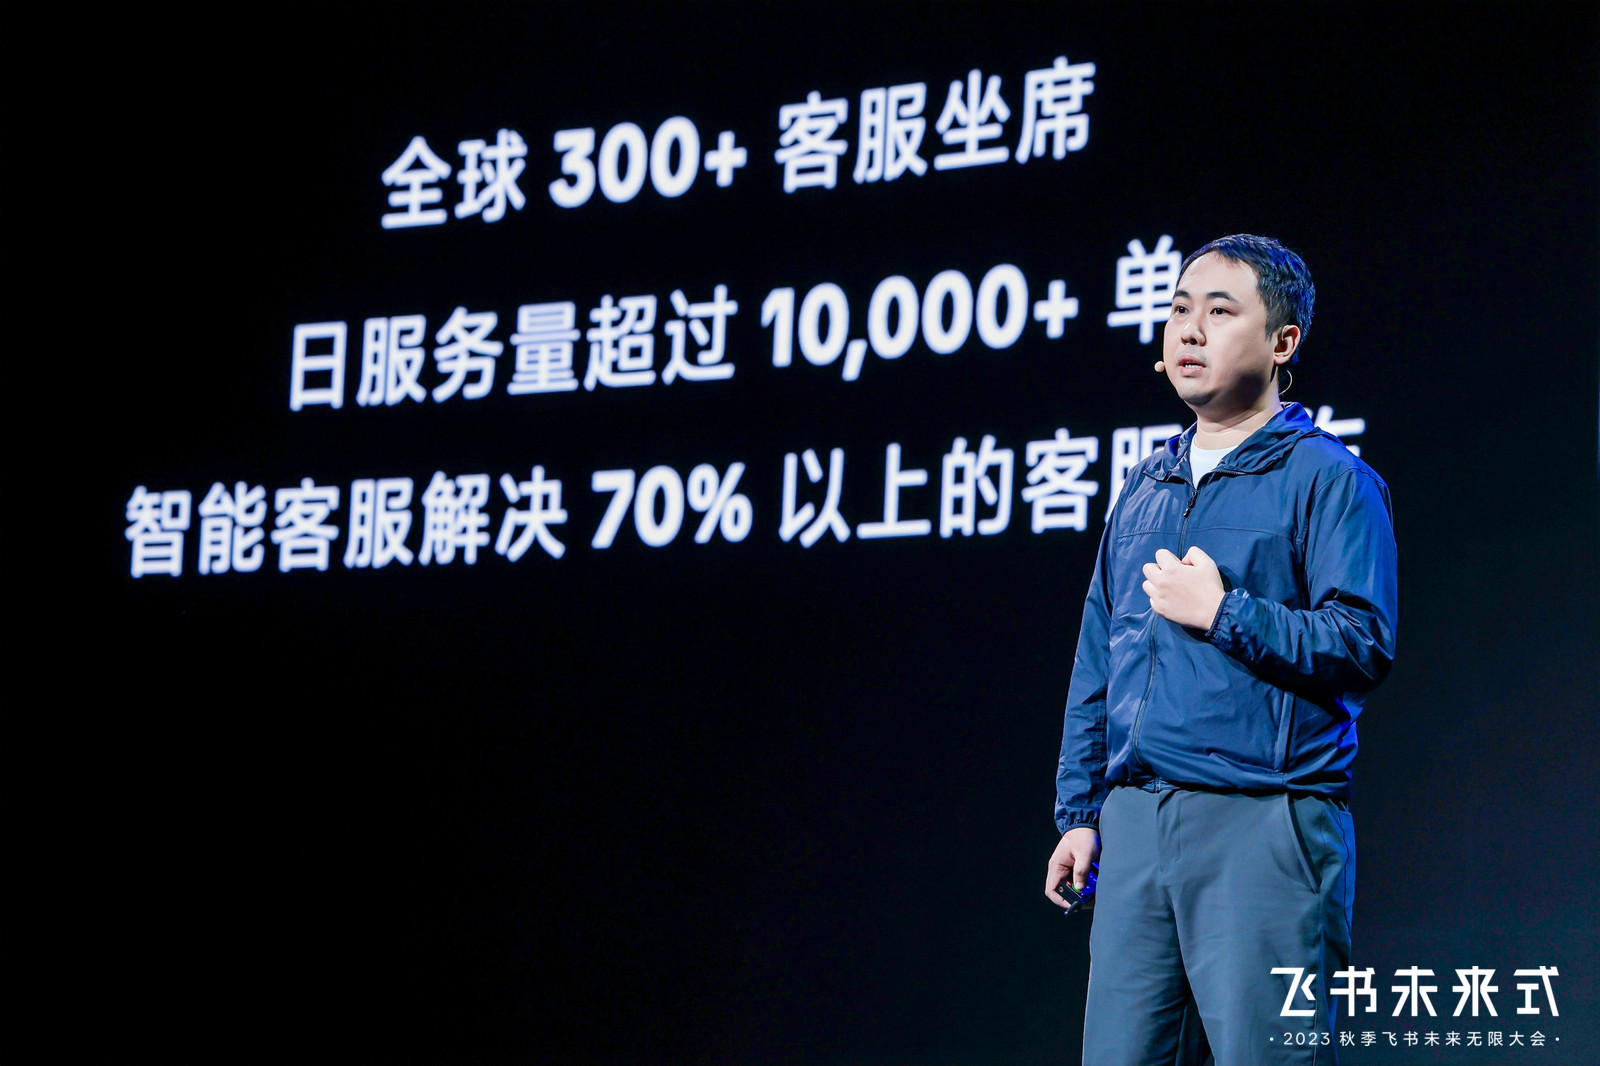 StevenYang, CEO of Anker: voc.ai AI ChatBot helps us solve more than 70% of customer service work